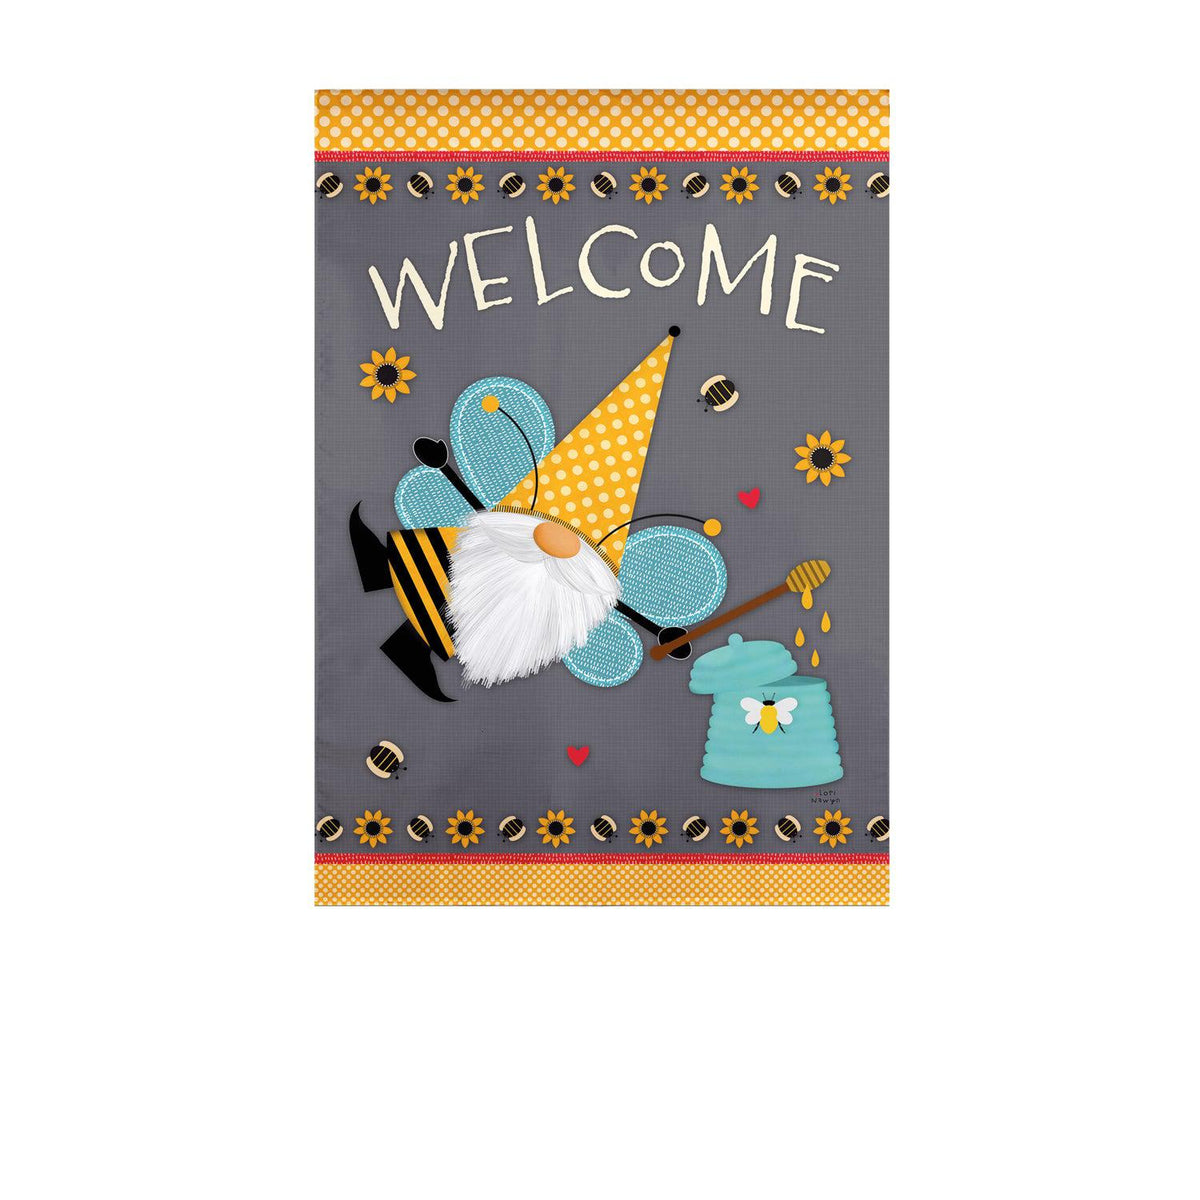 The Honey Gnome garden flag features a gnome in bee costume with a honey dipper dripping into a pot and the word "Welcome".